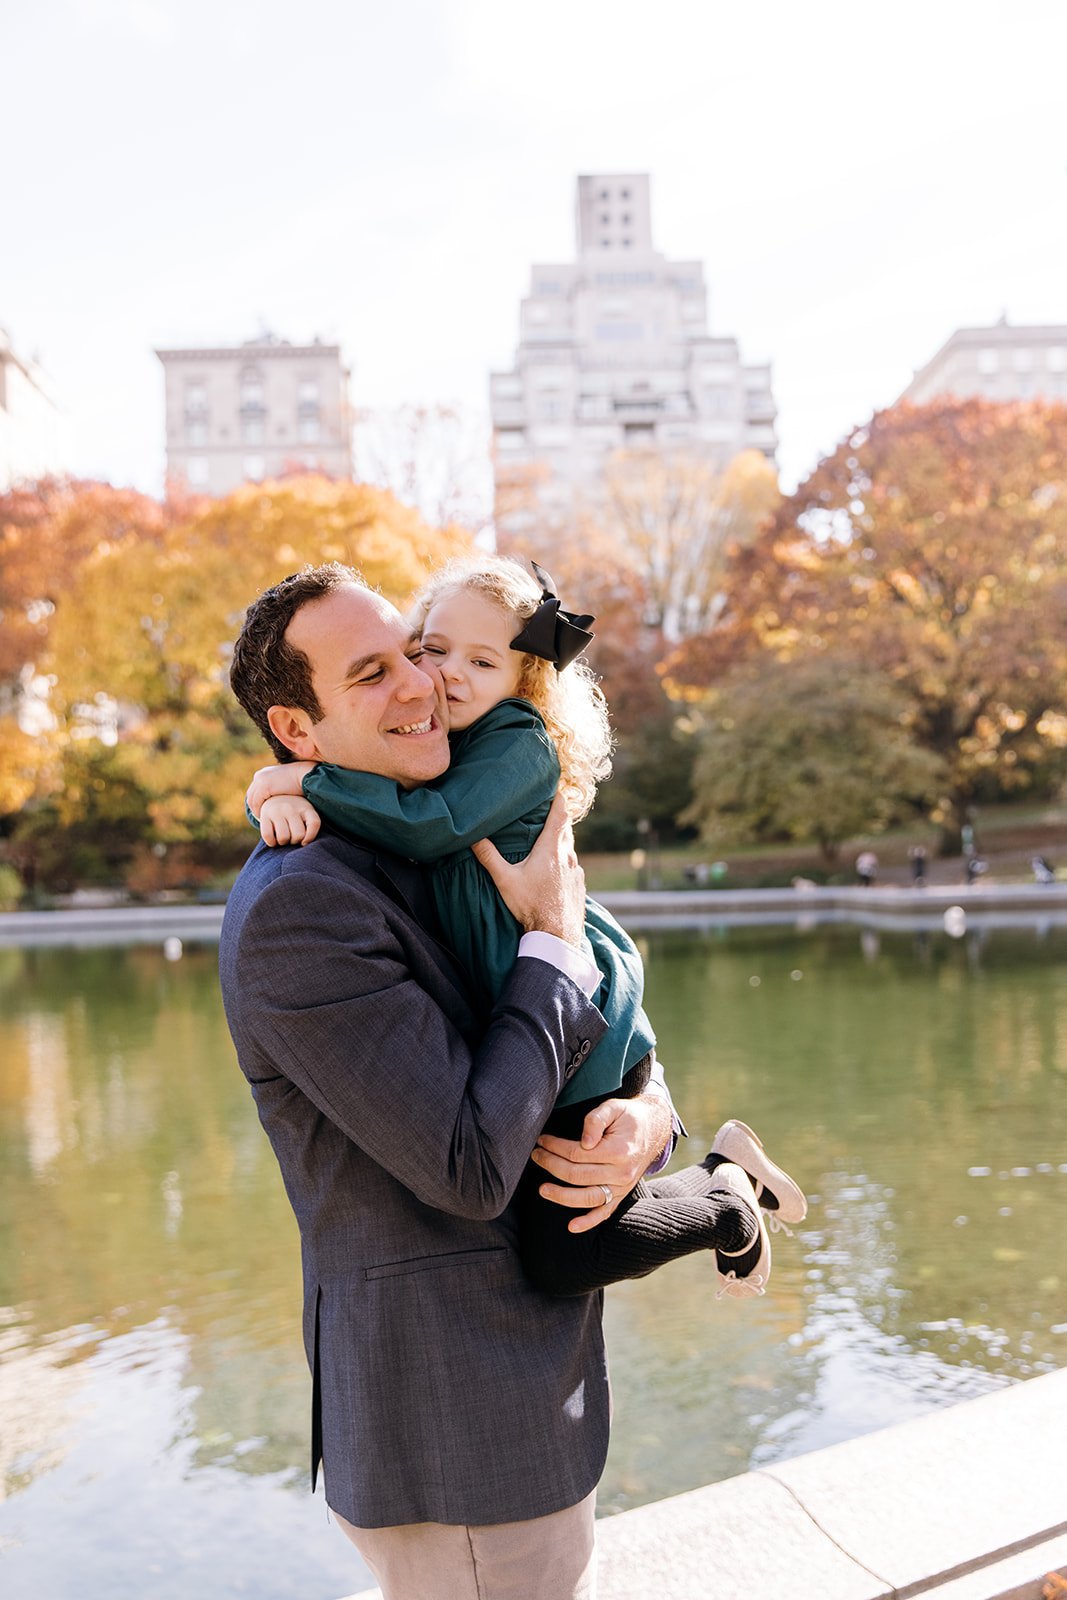 Fall family photos New York  Autumn family portraits in NYC  Family photography in Central Park  NYC fall photography sessions for families  outfits for family pictures in New York